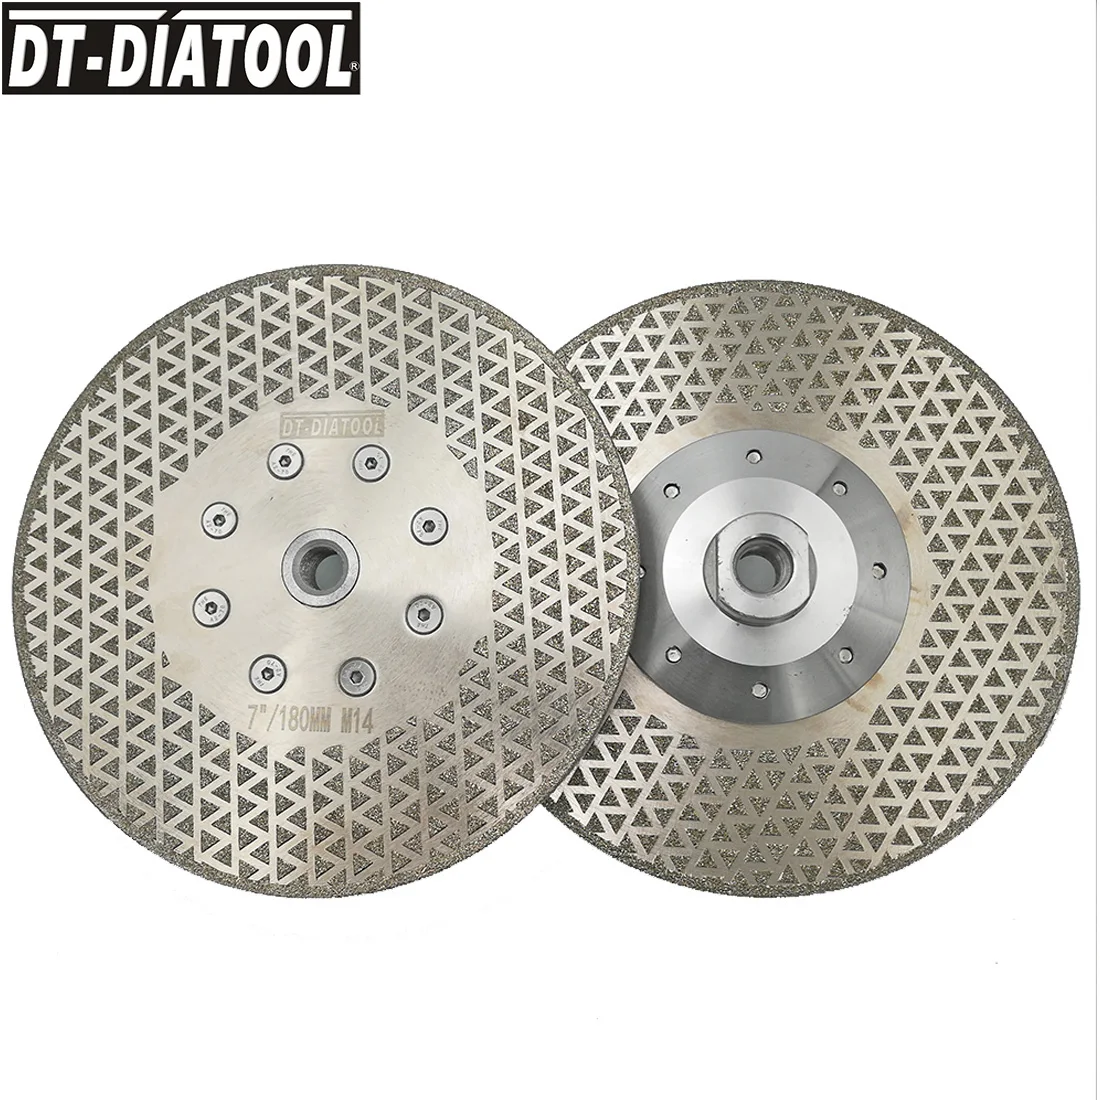 DT-DIATOOL 2pcs Electroplated Diamond Cutting Discs Stone Grinding Saw Blade Cutting Wheel M14 Flange for Marble tile 7